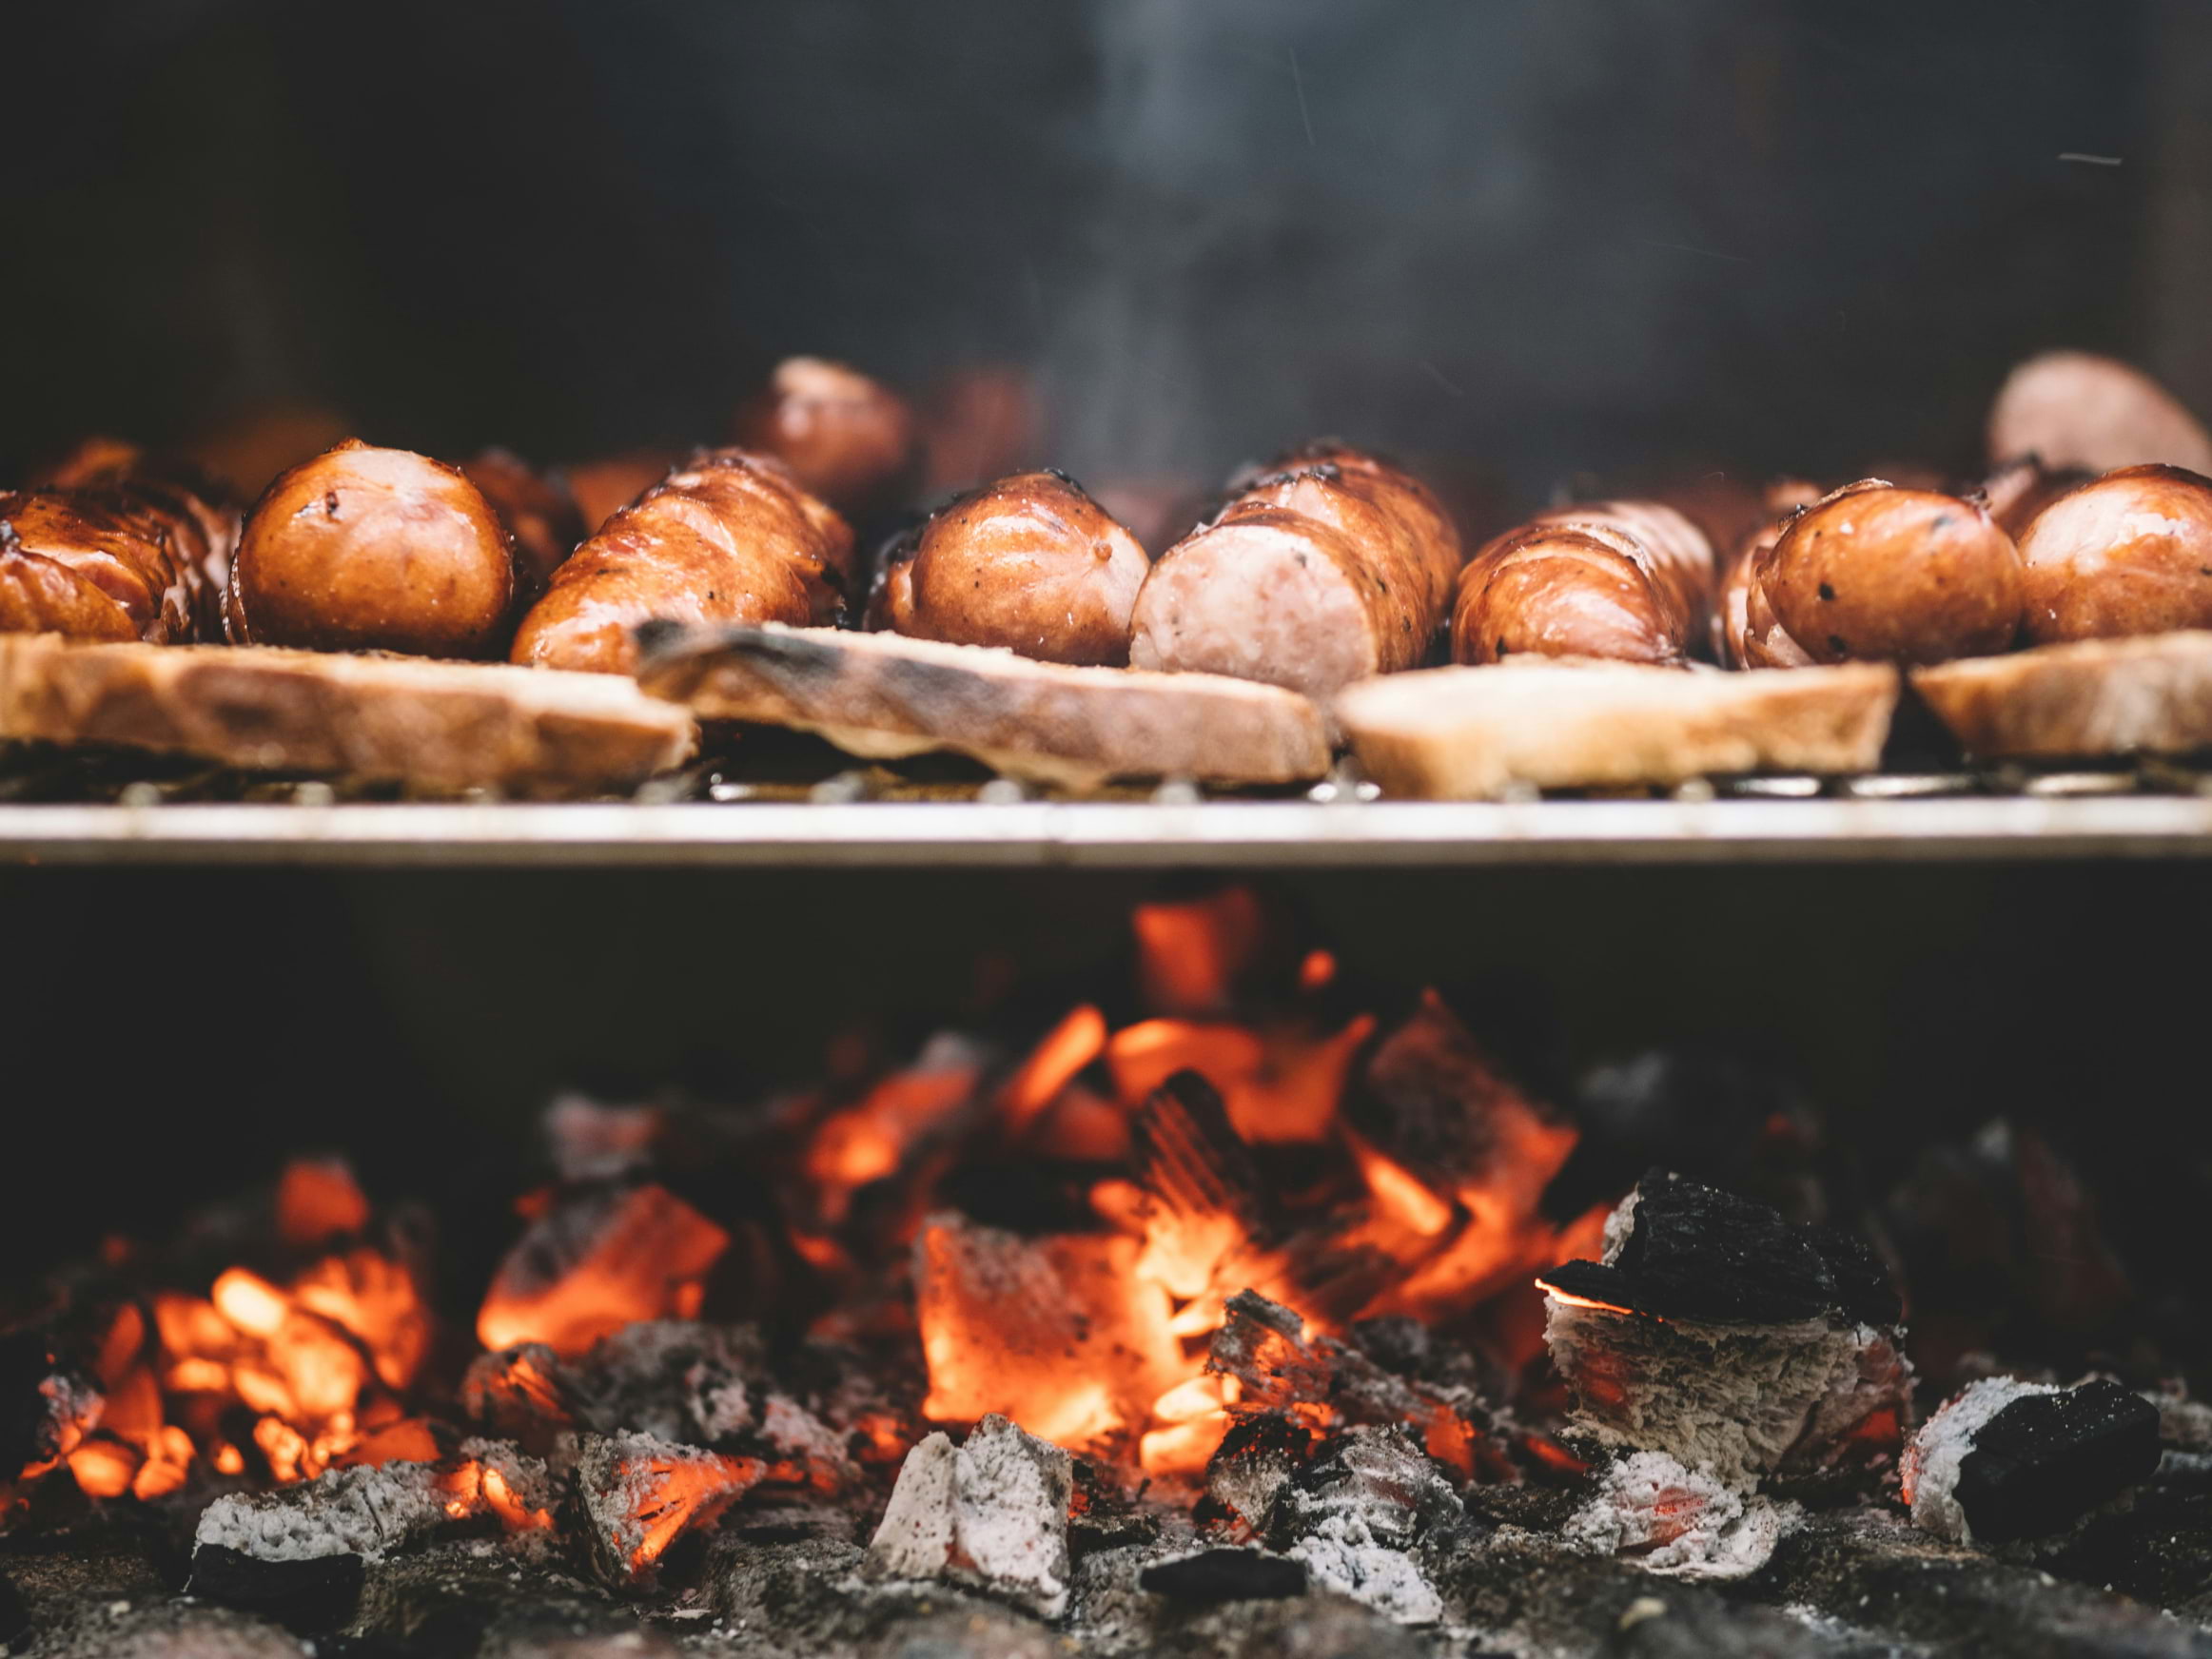 Europe's largest BBQ festival is coming to East London this June